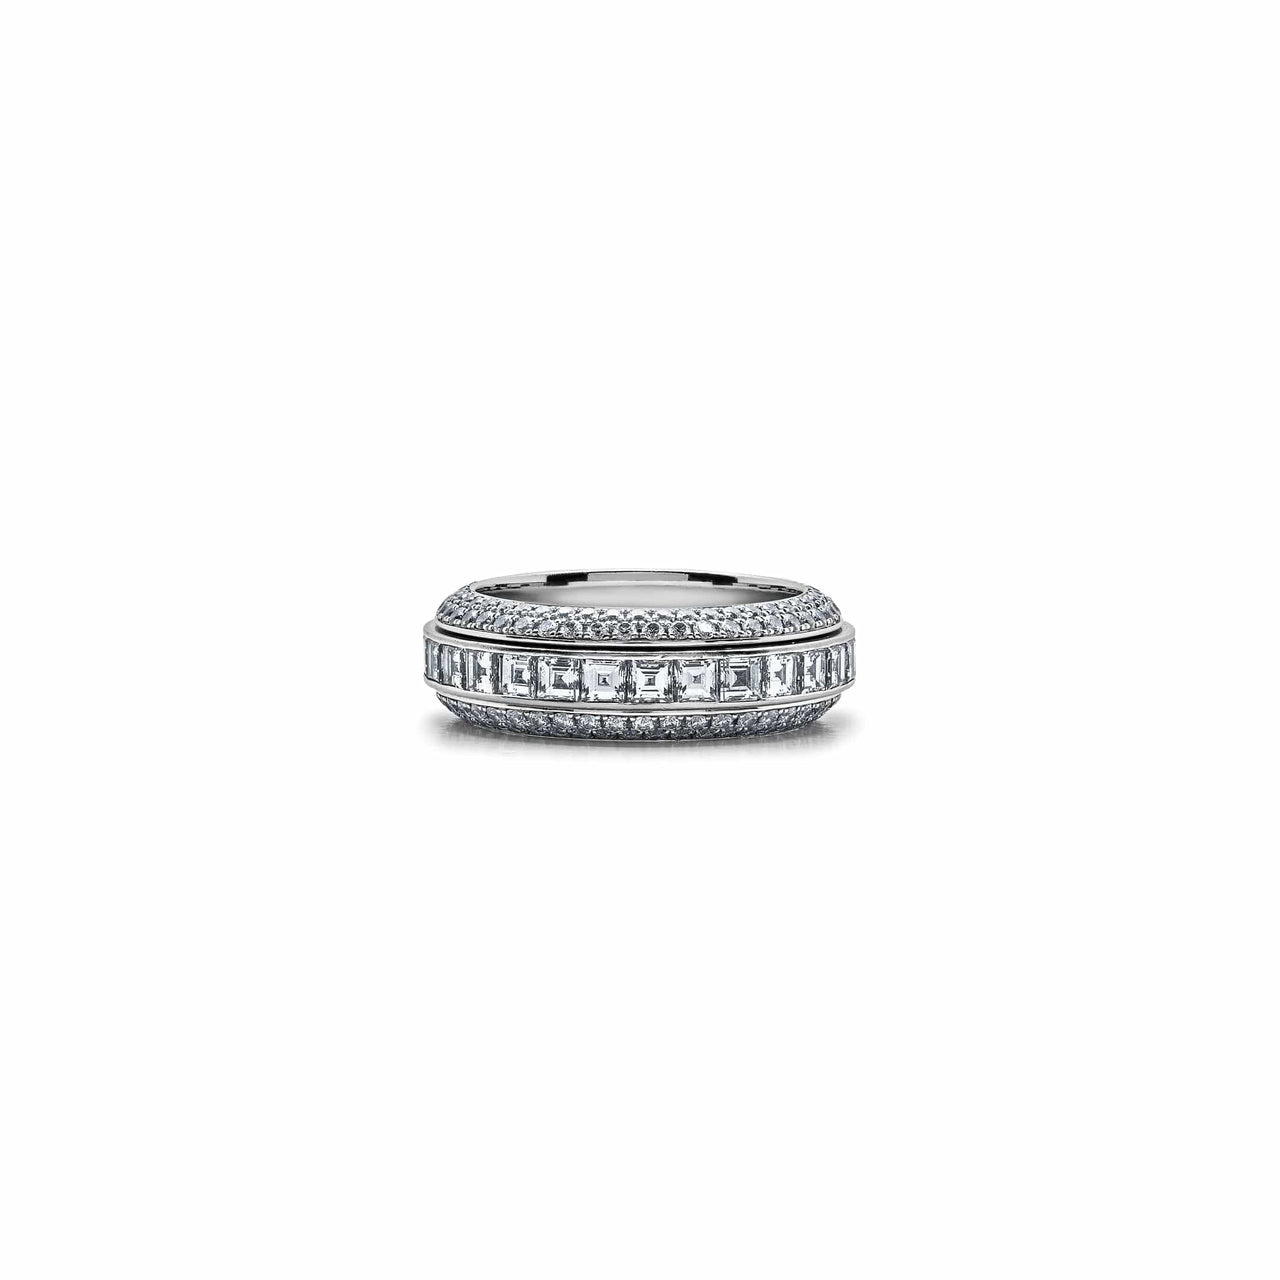 Piaget 'Possession Collection' White Gold and Diamond Band